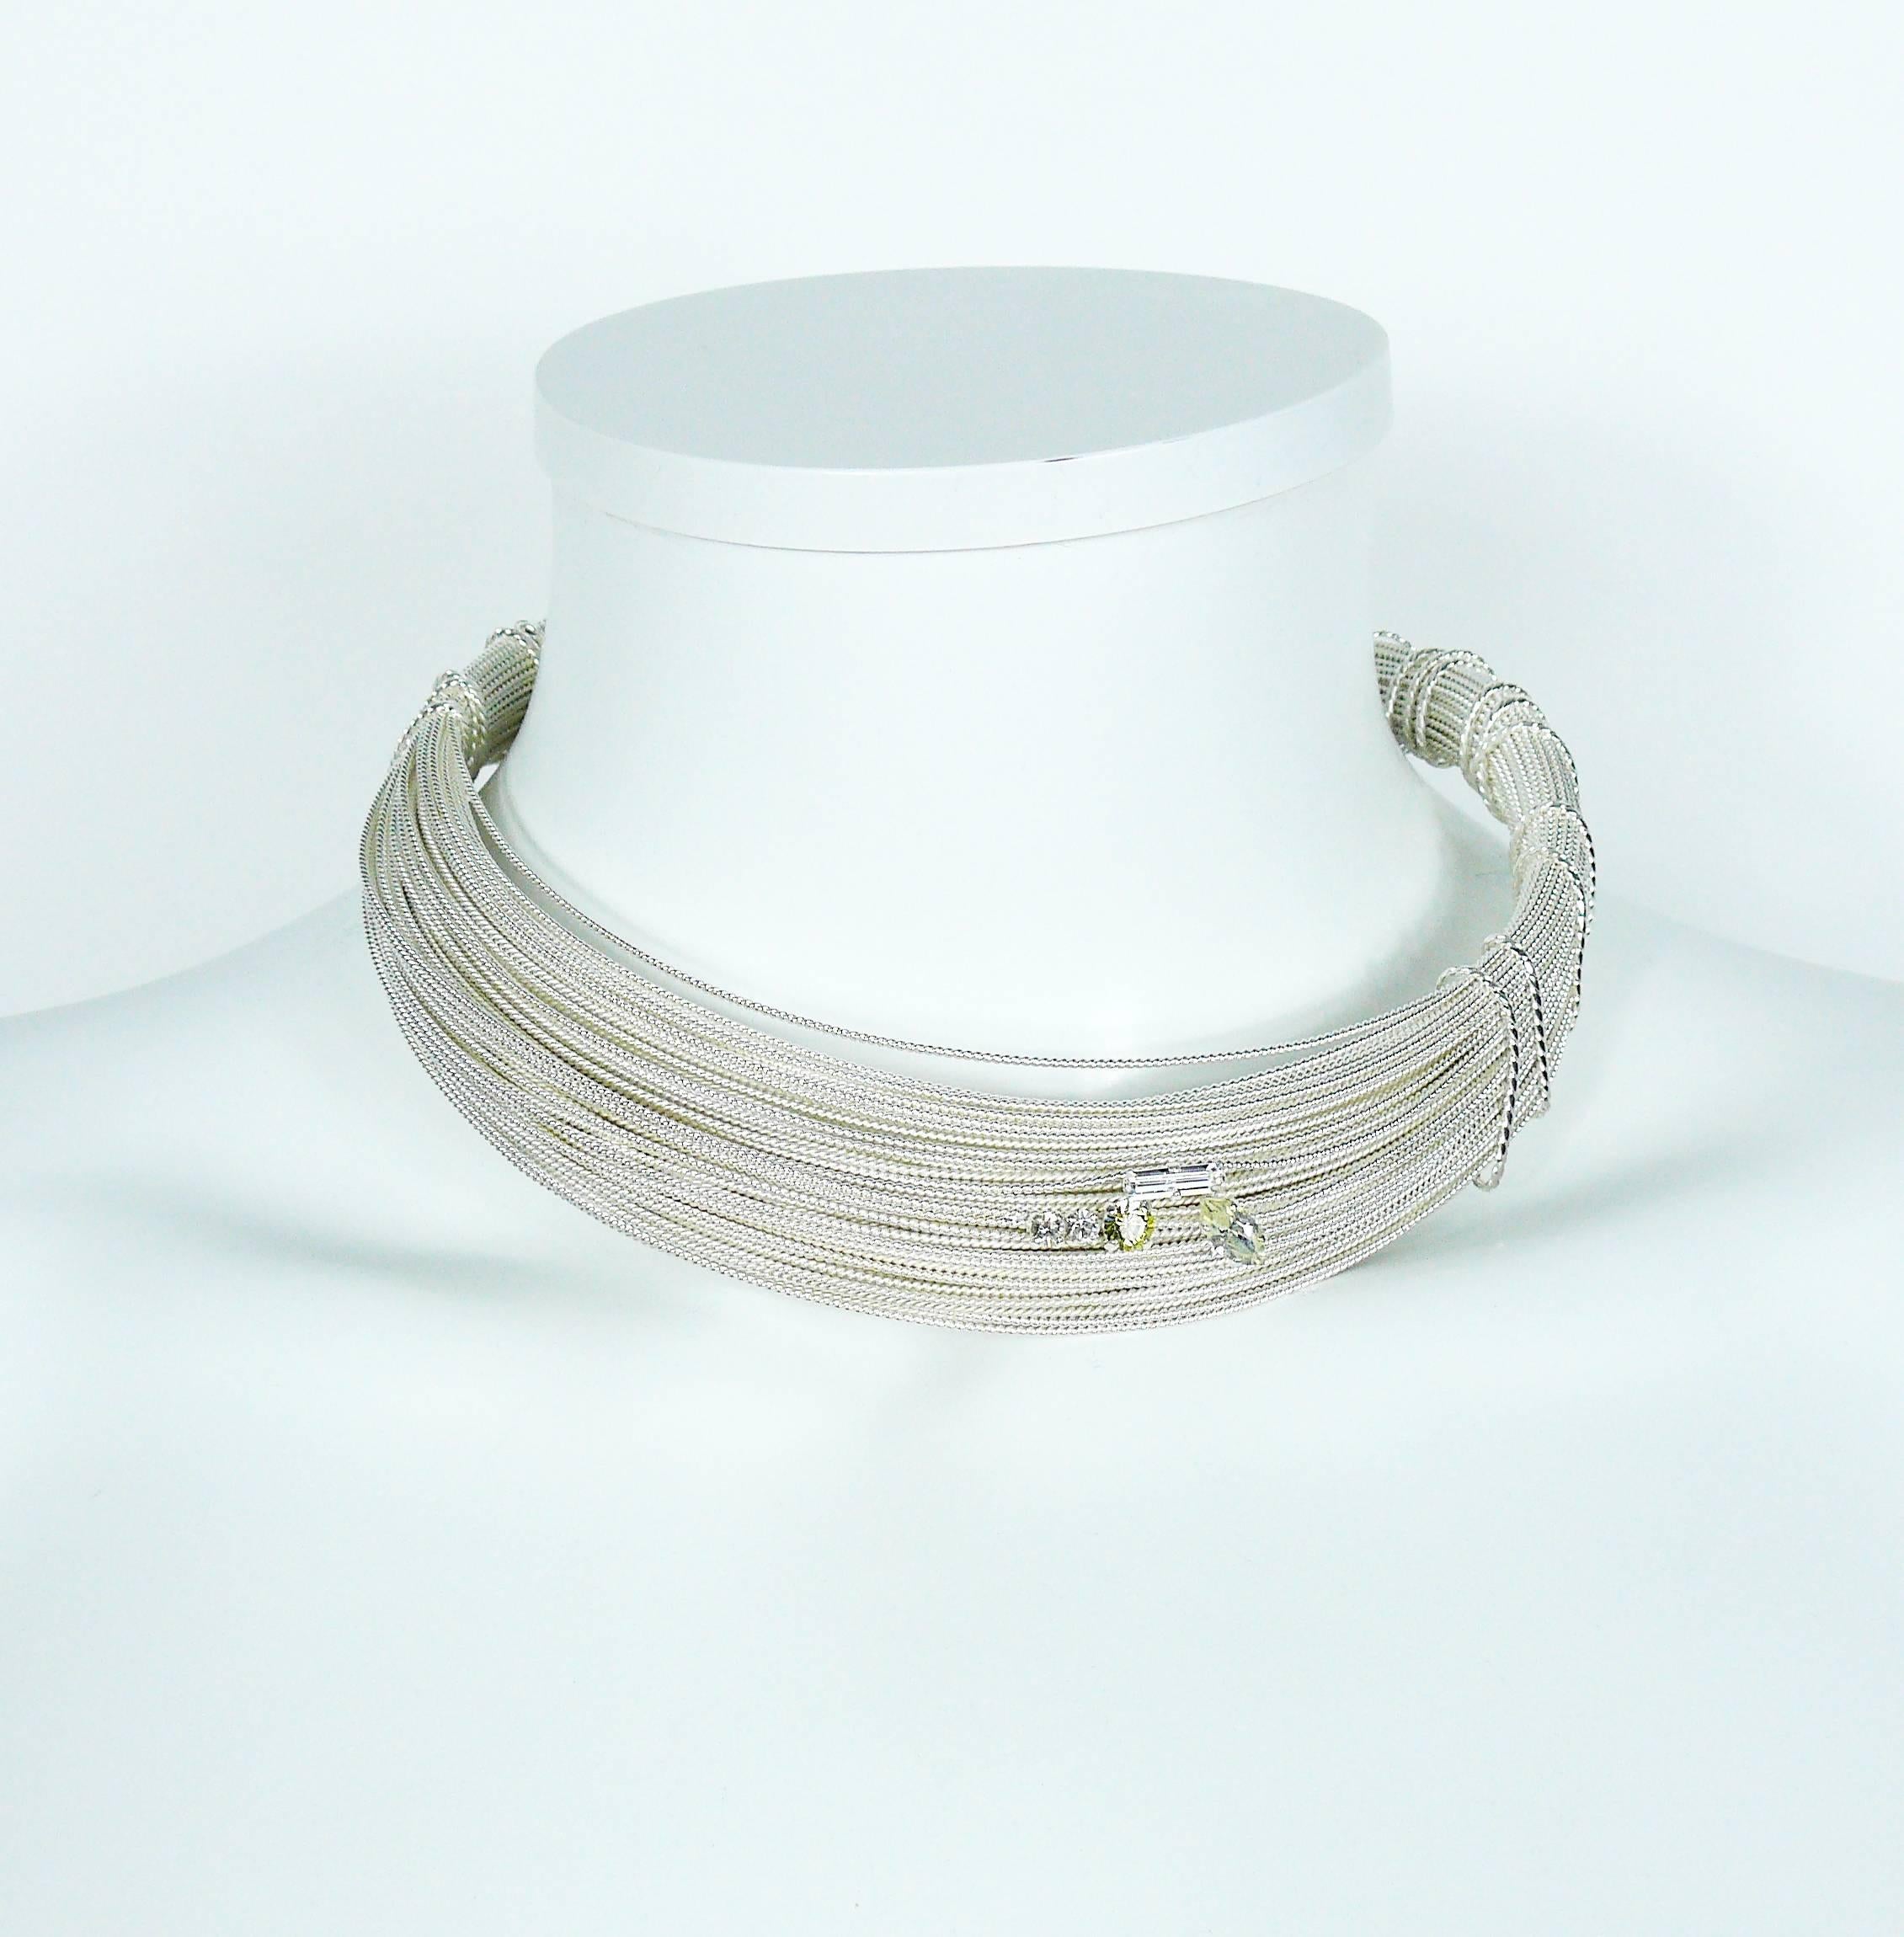 CHRISTIAN LACROIX vintage silver tone bundled wires rigid choker necklace with rhinestone embellishement.

Silver tone metal hardware.

Embossed CL.

Indicative measurements : inner circumference (unstretched) approx. 38.96 cm (15.34 inches) / inner